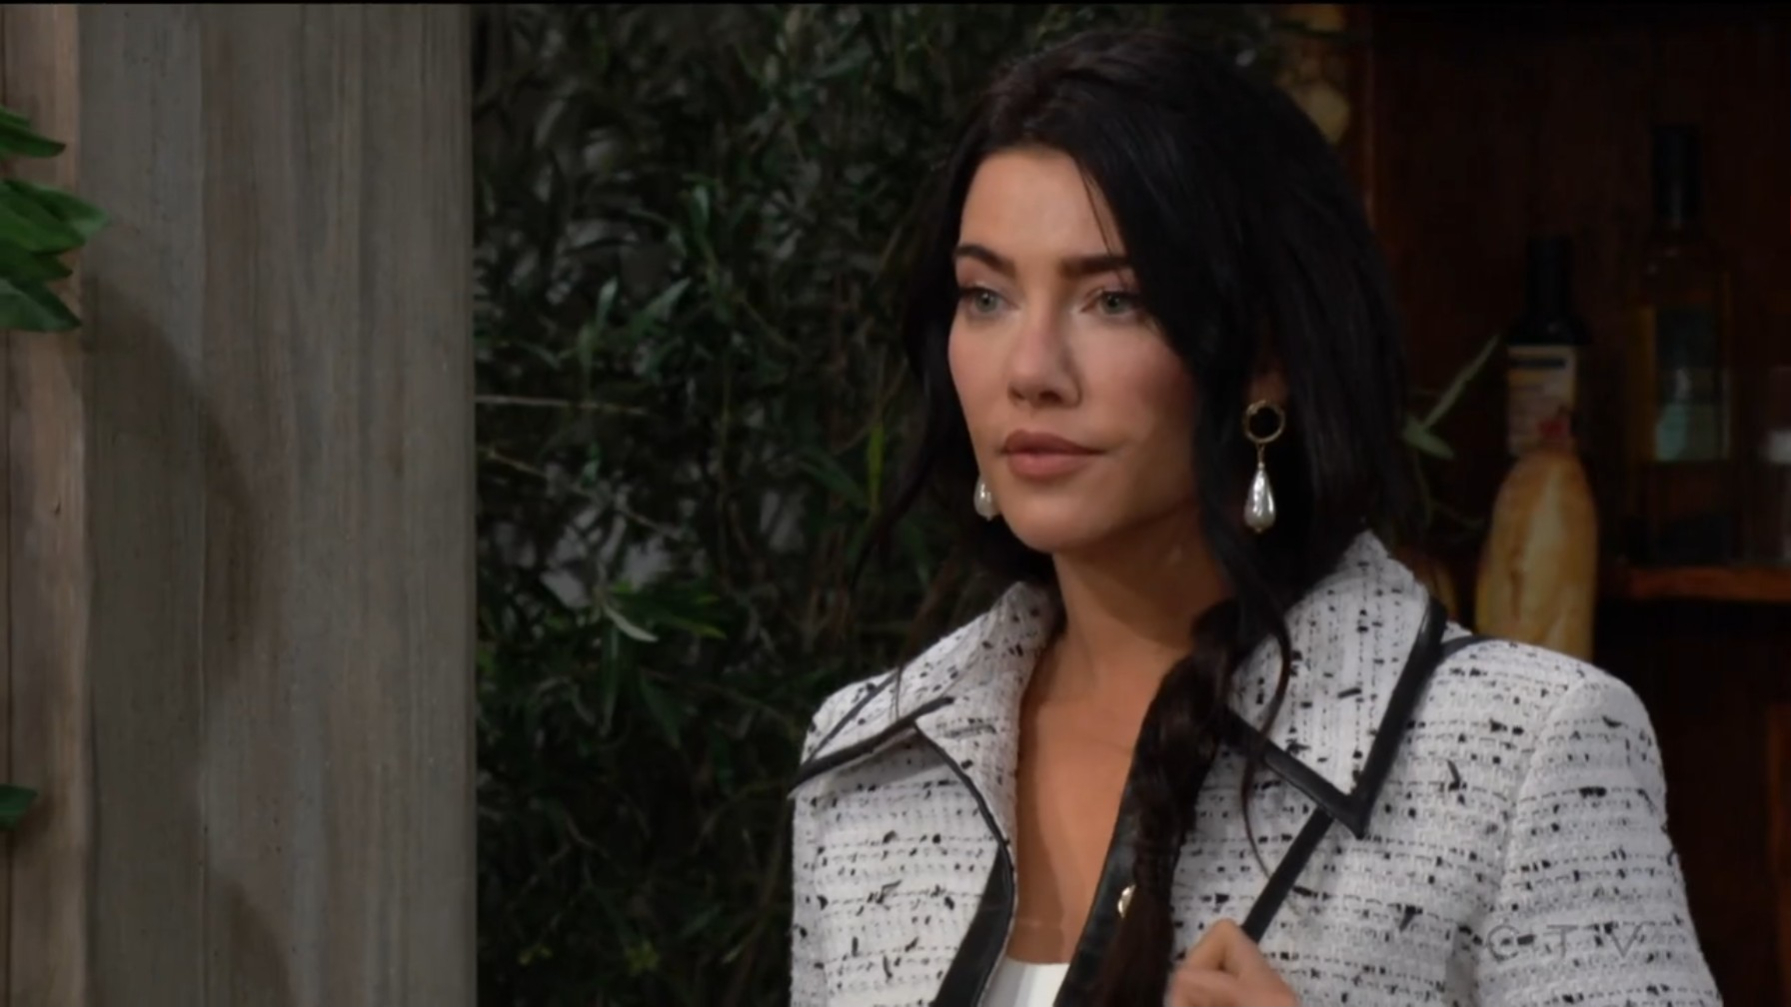 steffy sees ivy, purses her lips